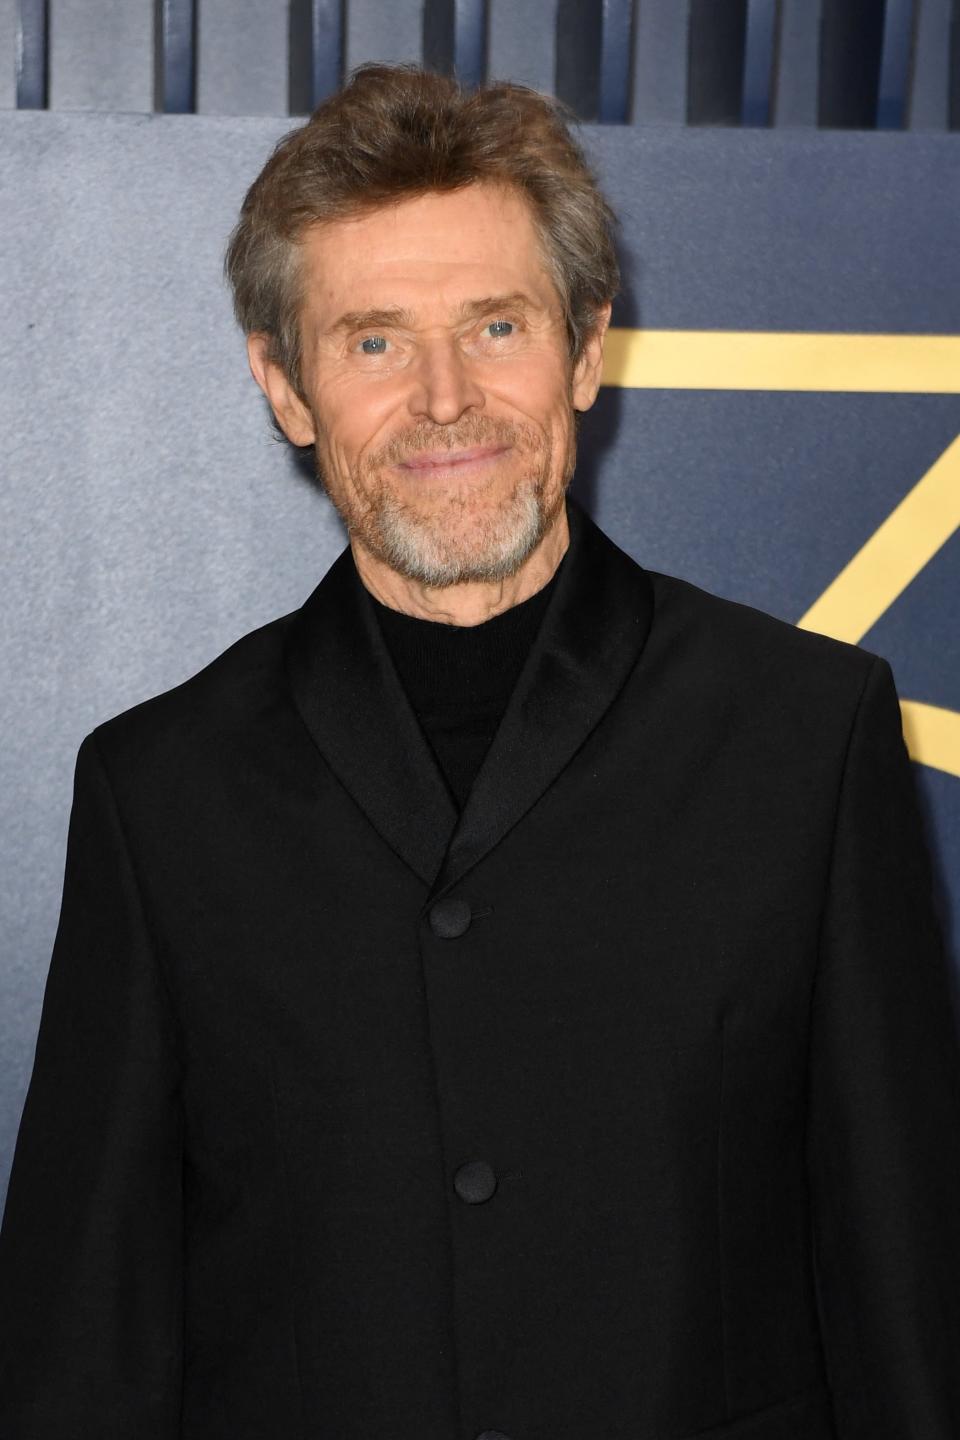 Willem Dafoe smiling in a simple suit on the red carpet